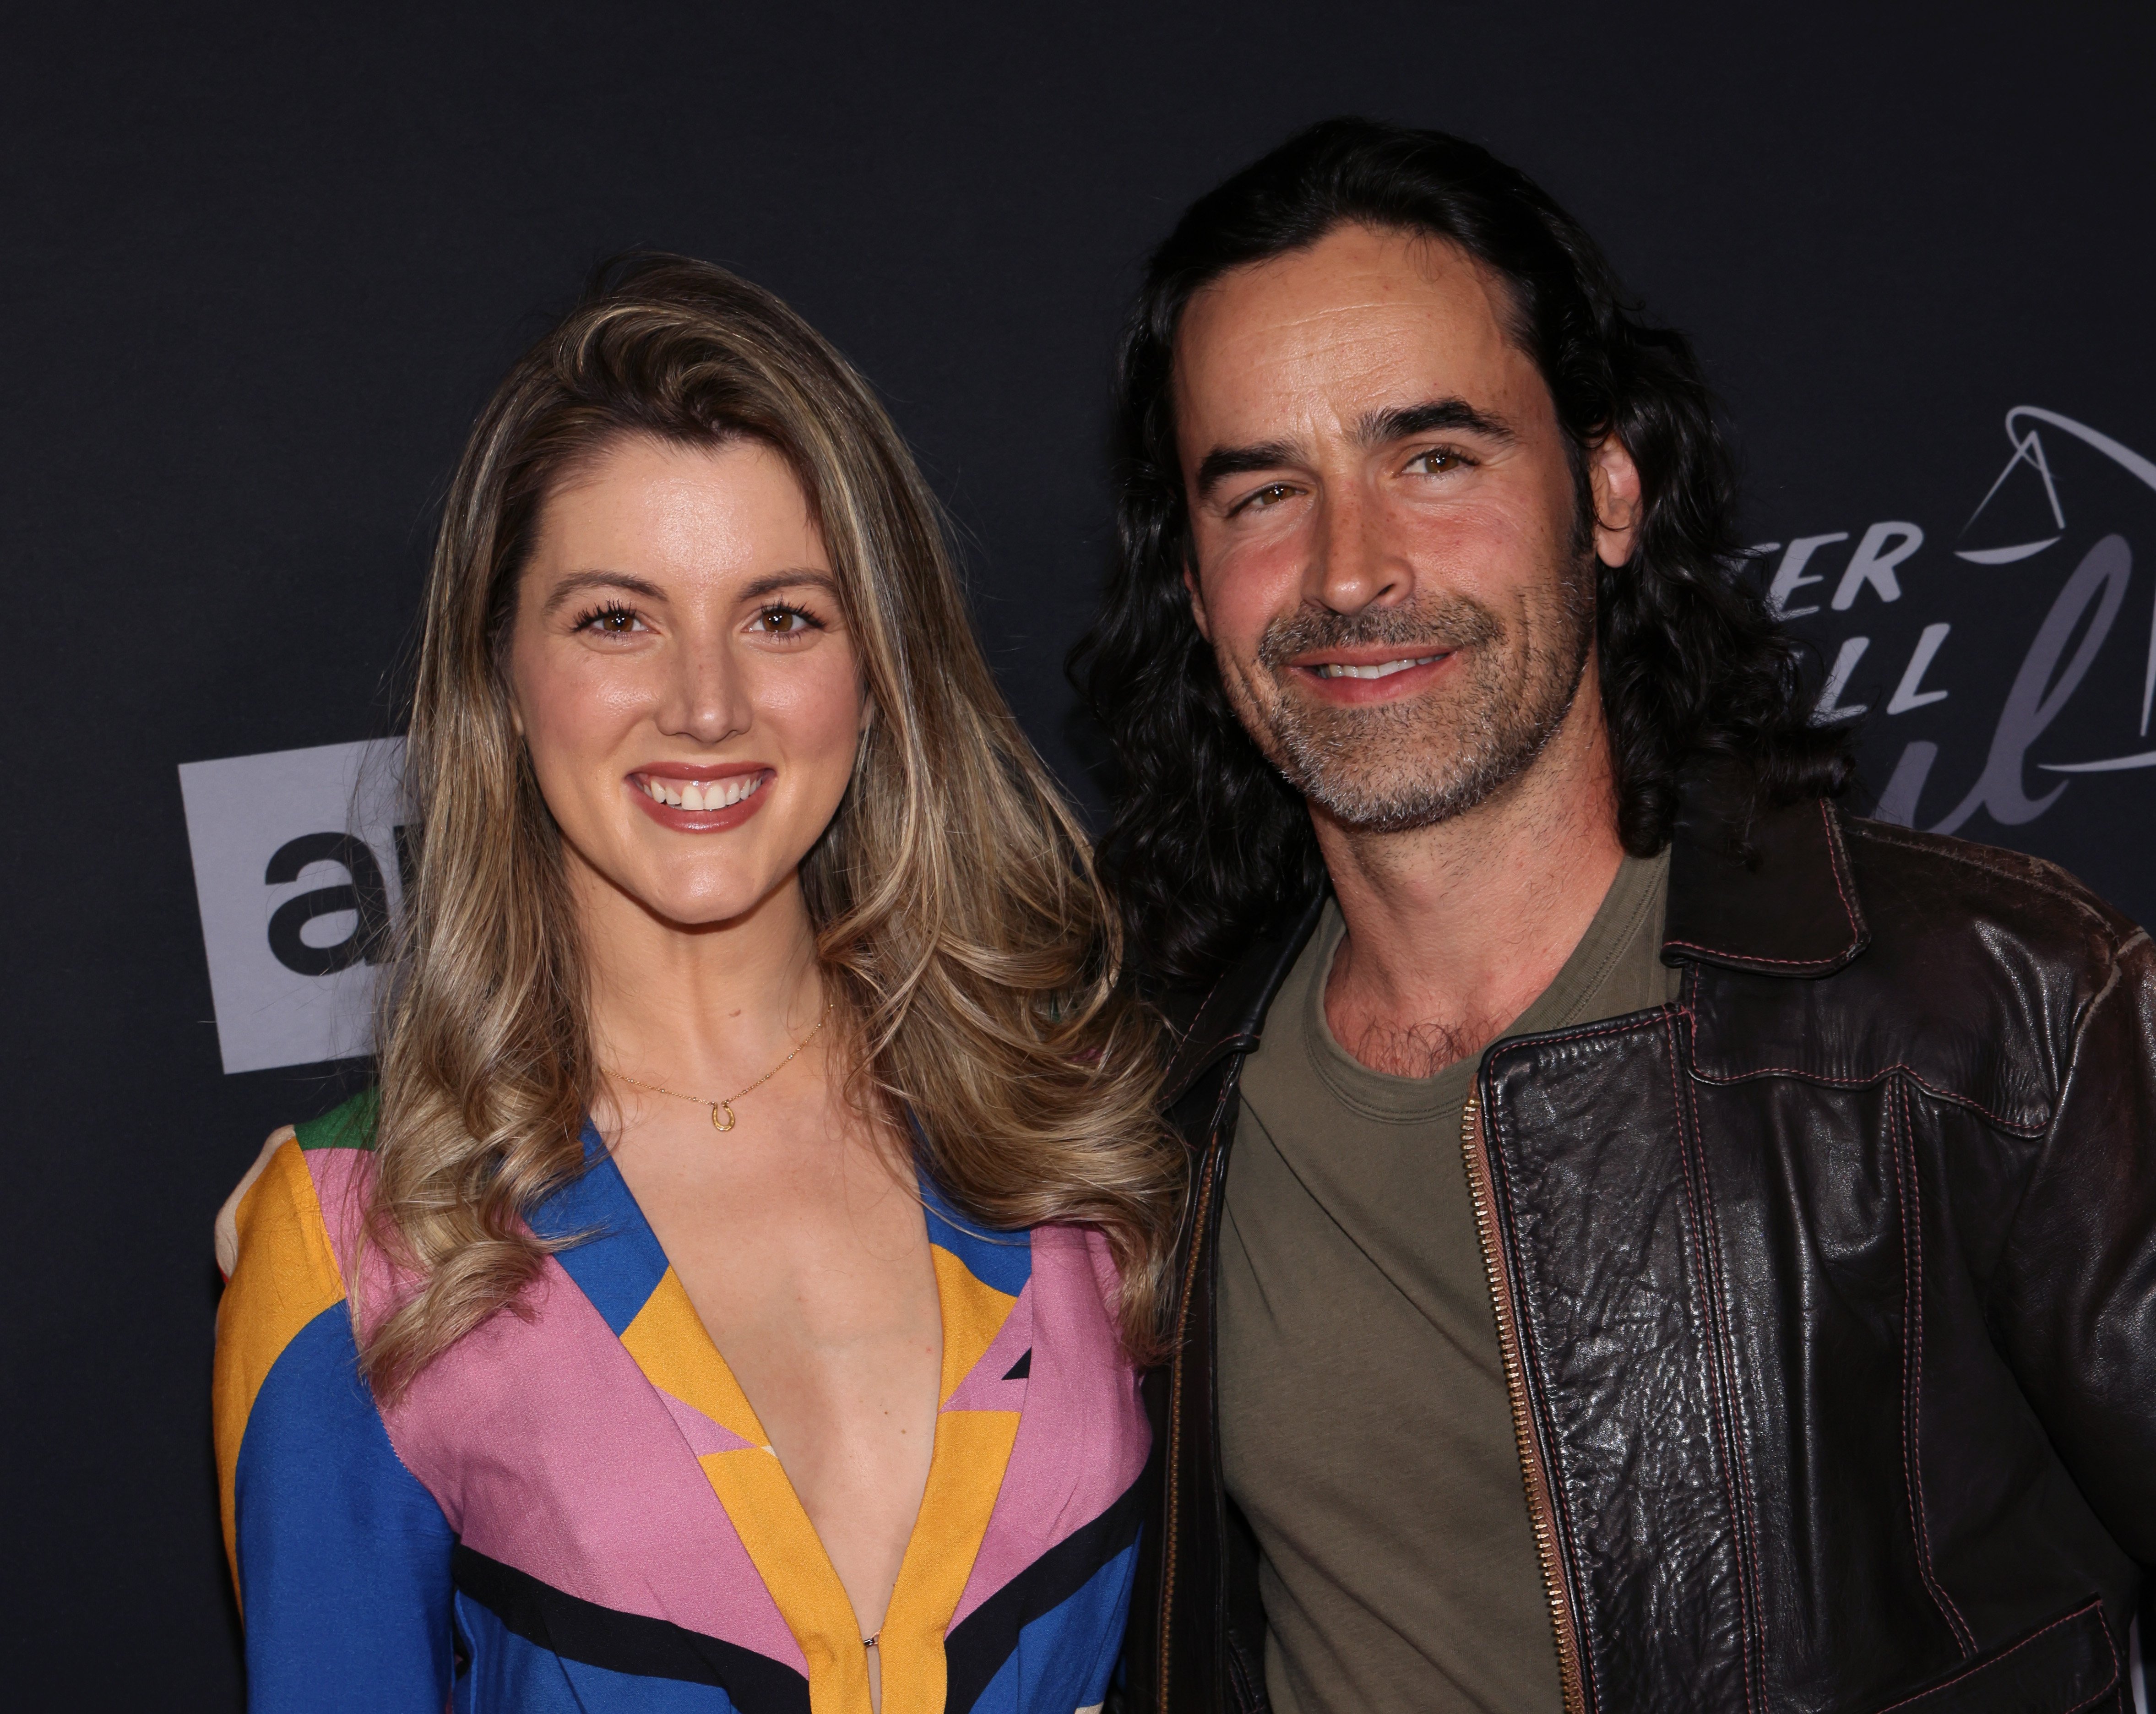 Jesse Bradford and Andrea Watrouse attend the premiere of the final season of AMC's "Better Call Saul" at Hollywood Legion Theater, on April 7, 2022, in Los Angeles, California. | Source: Getty Images